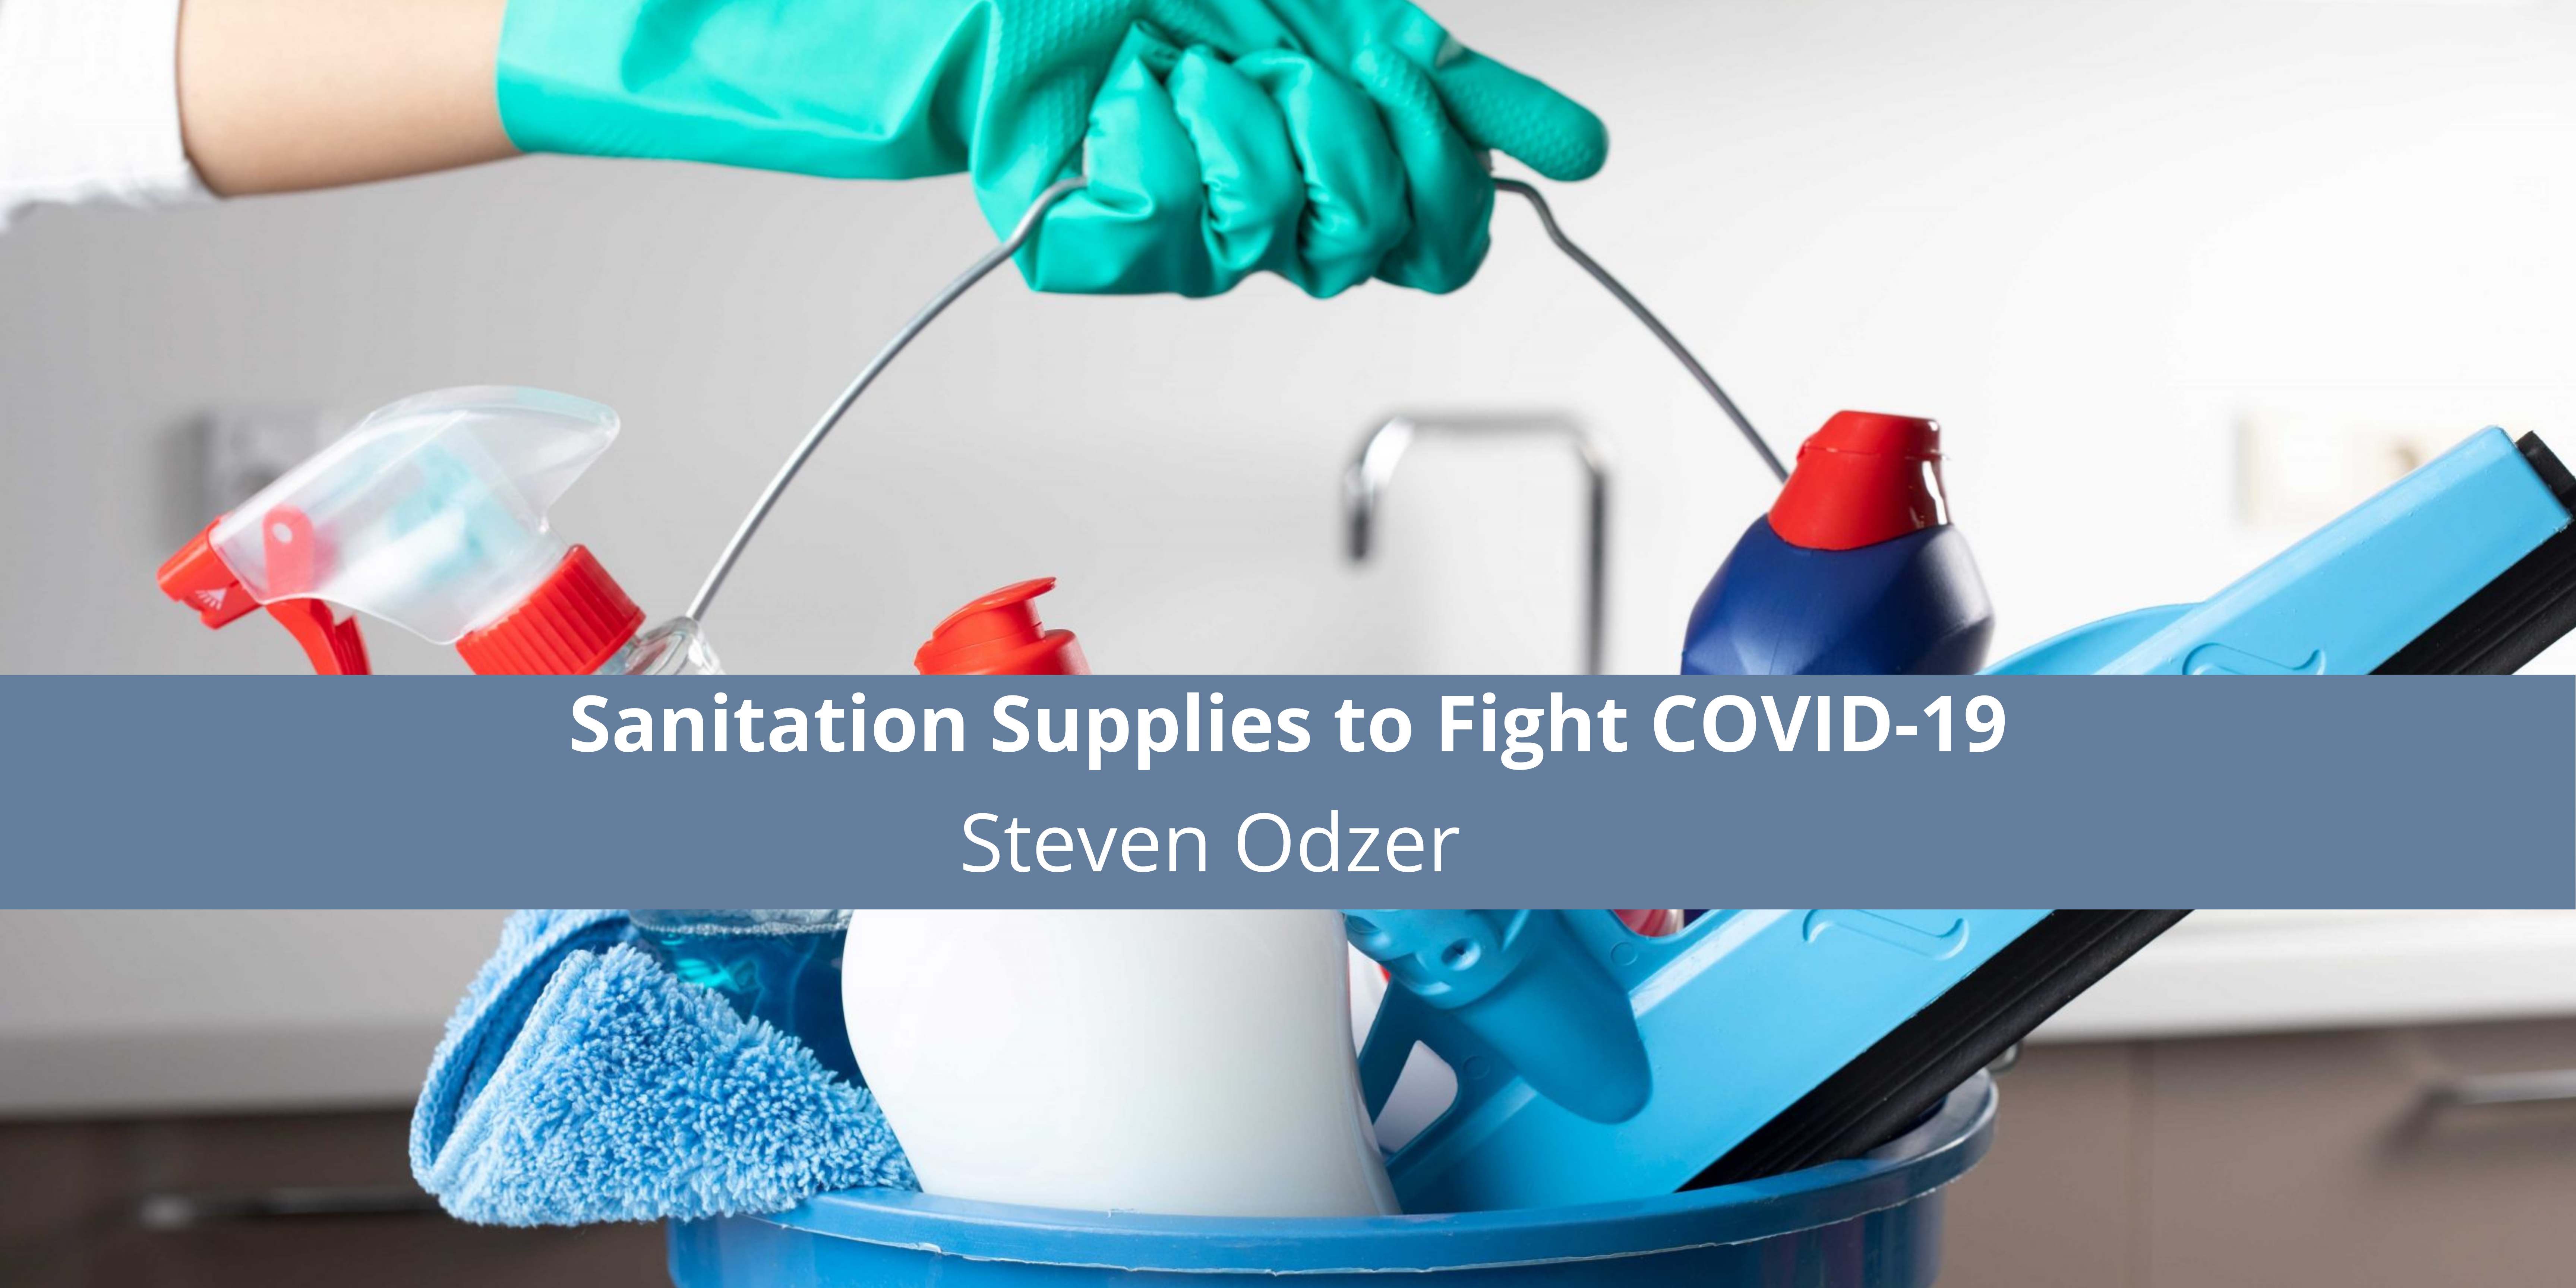 Steven Odzer and Buylifeguard.com Offering Sanitation Supplies to Fight COVID-19